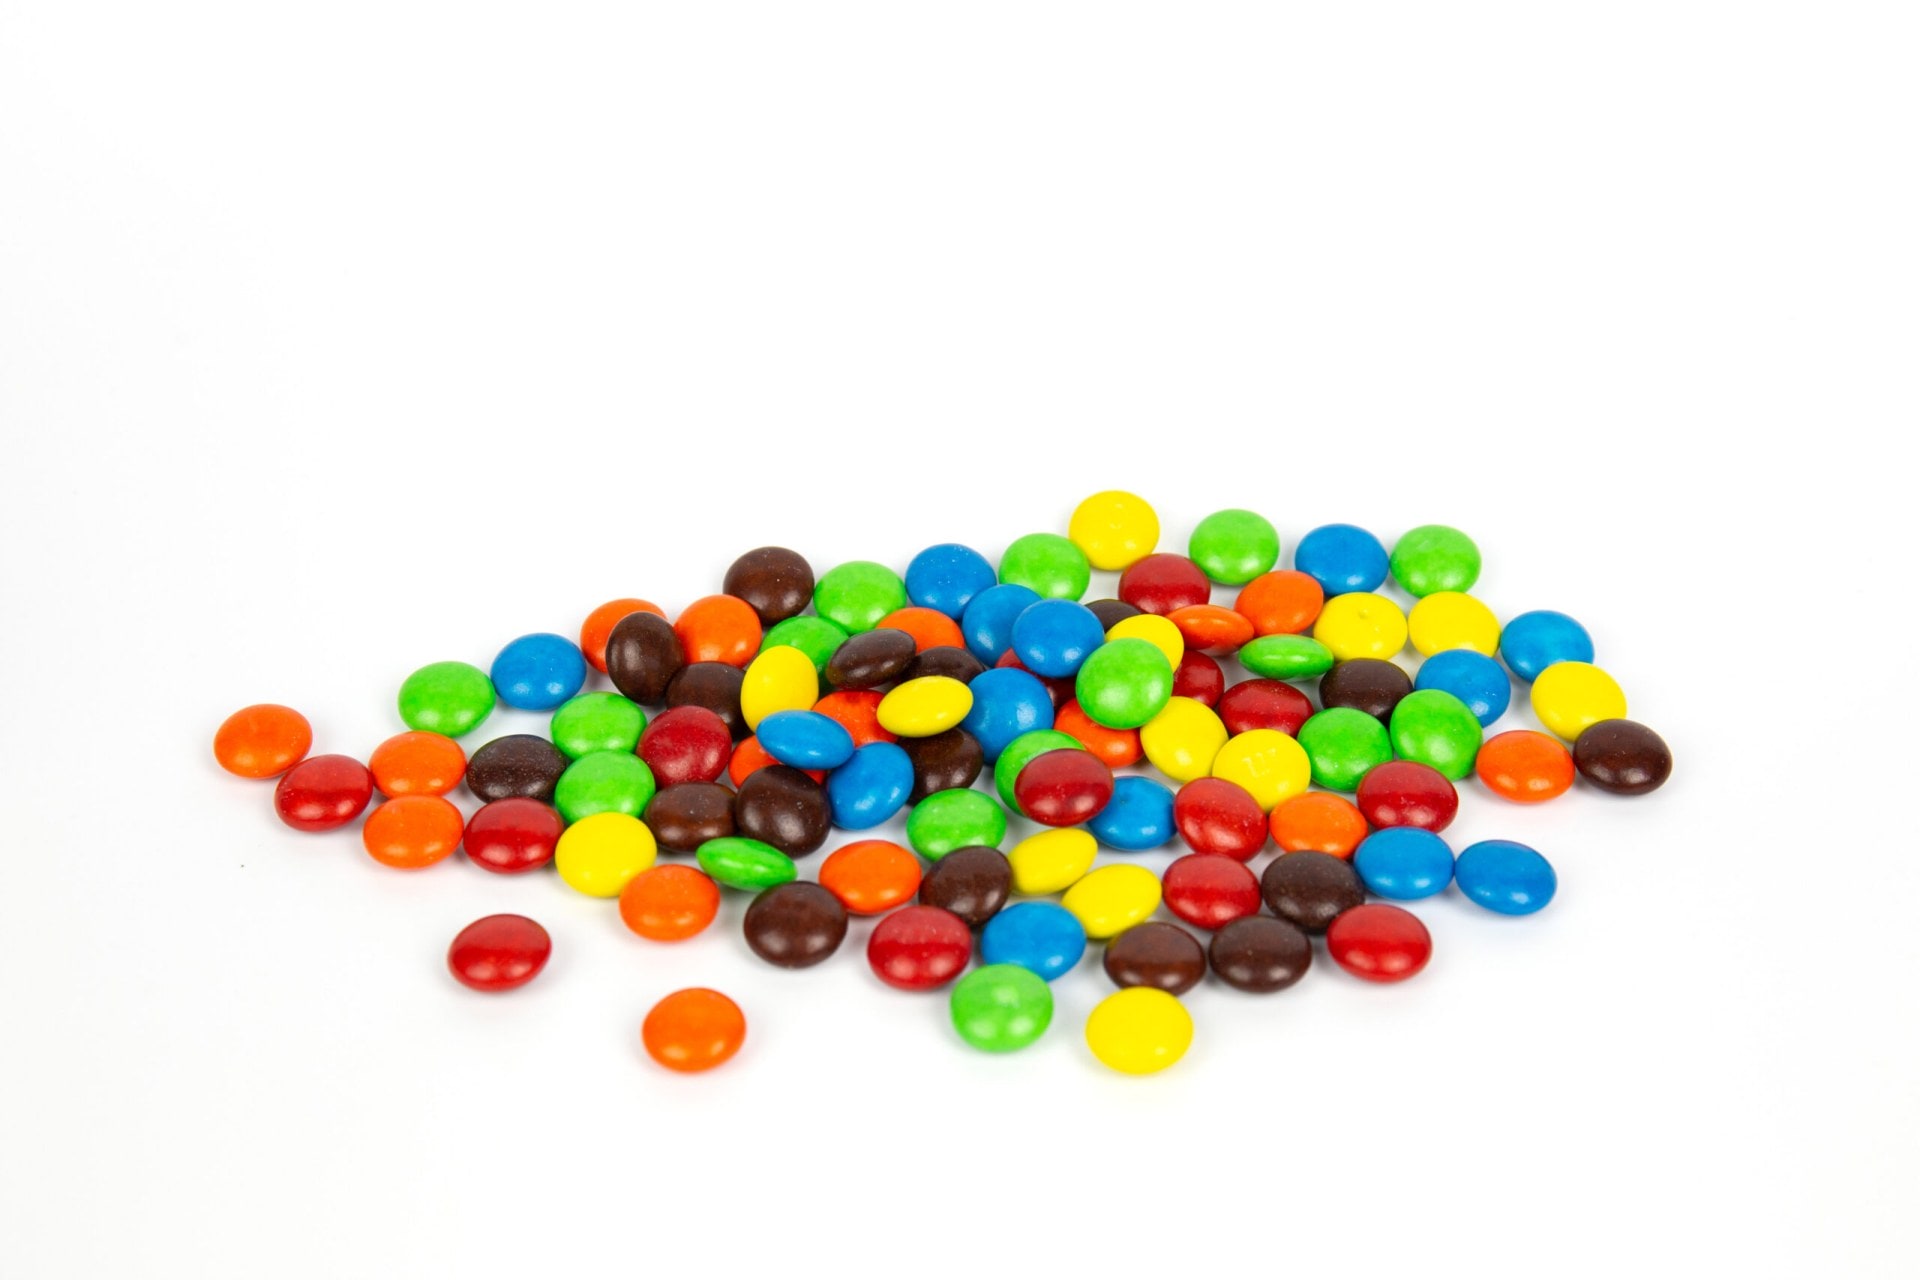 Pile of M&Ms on white background